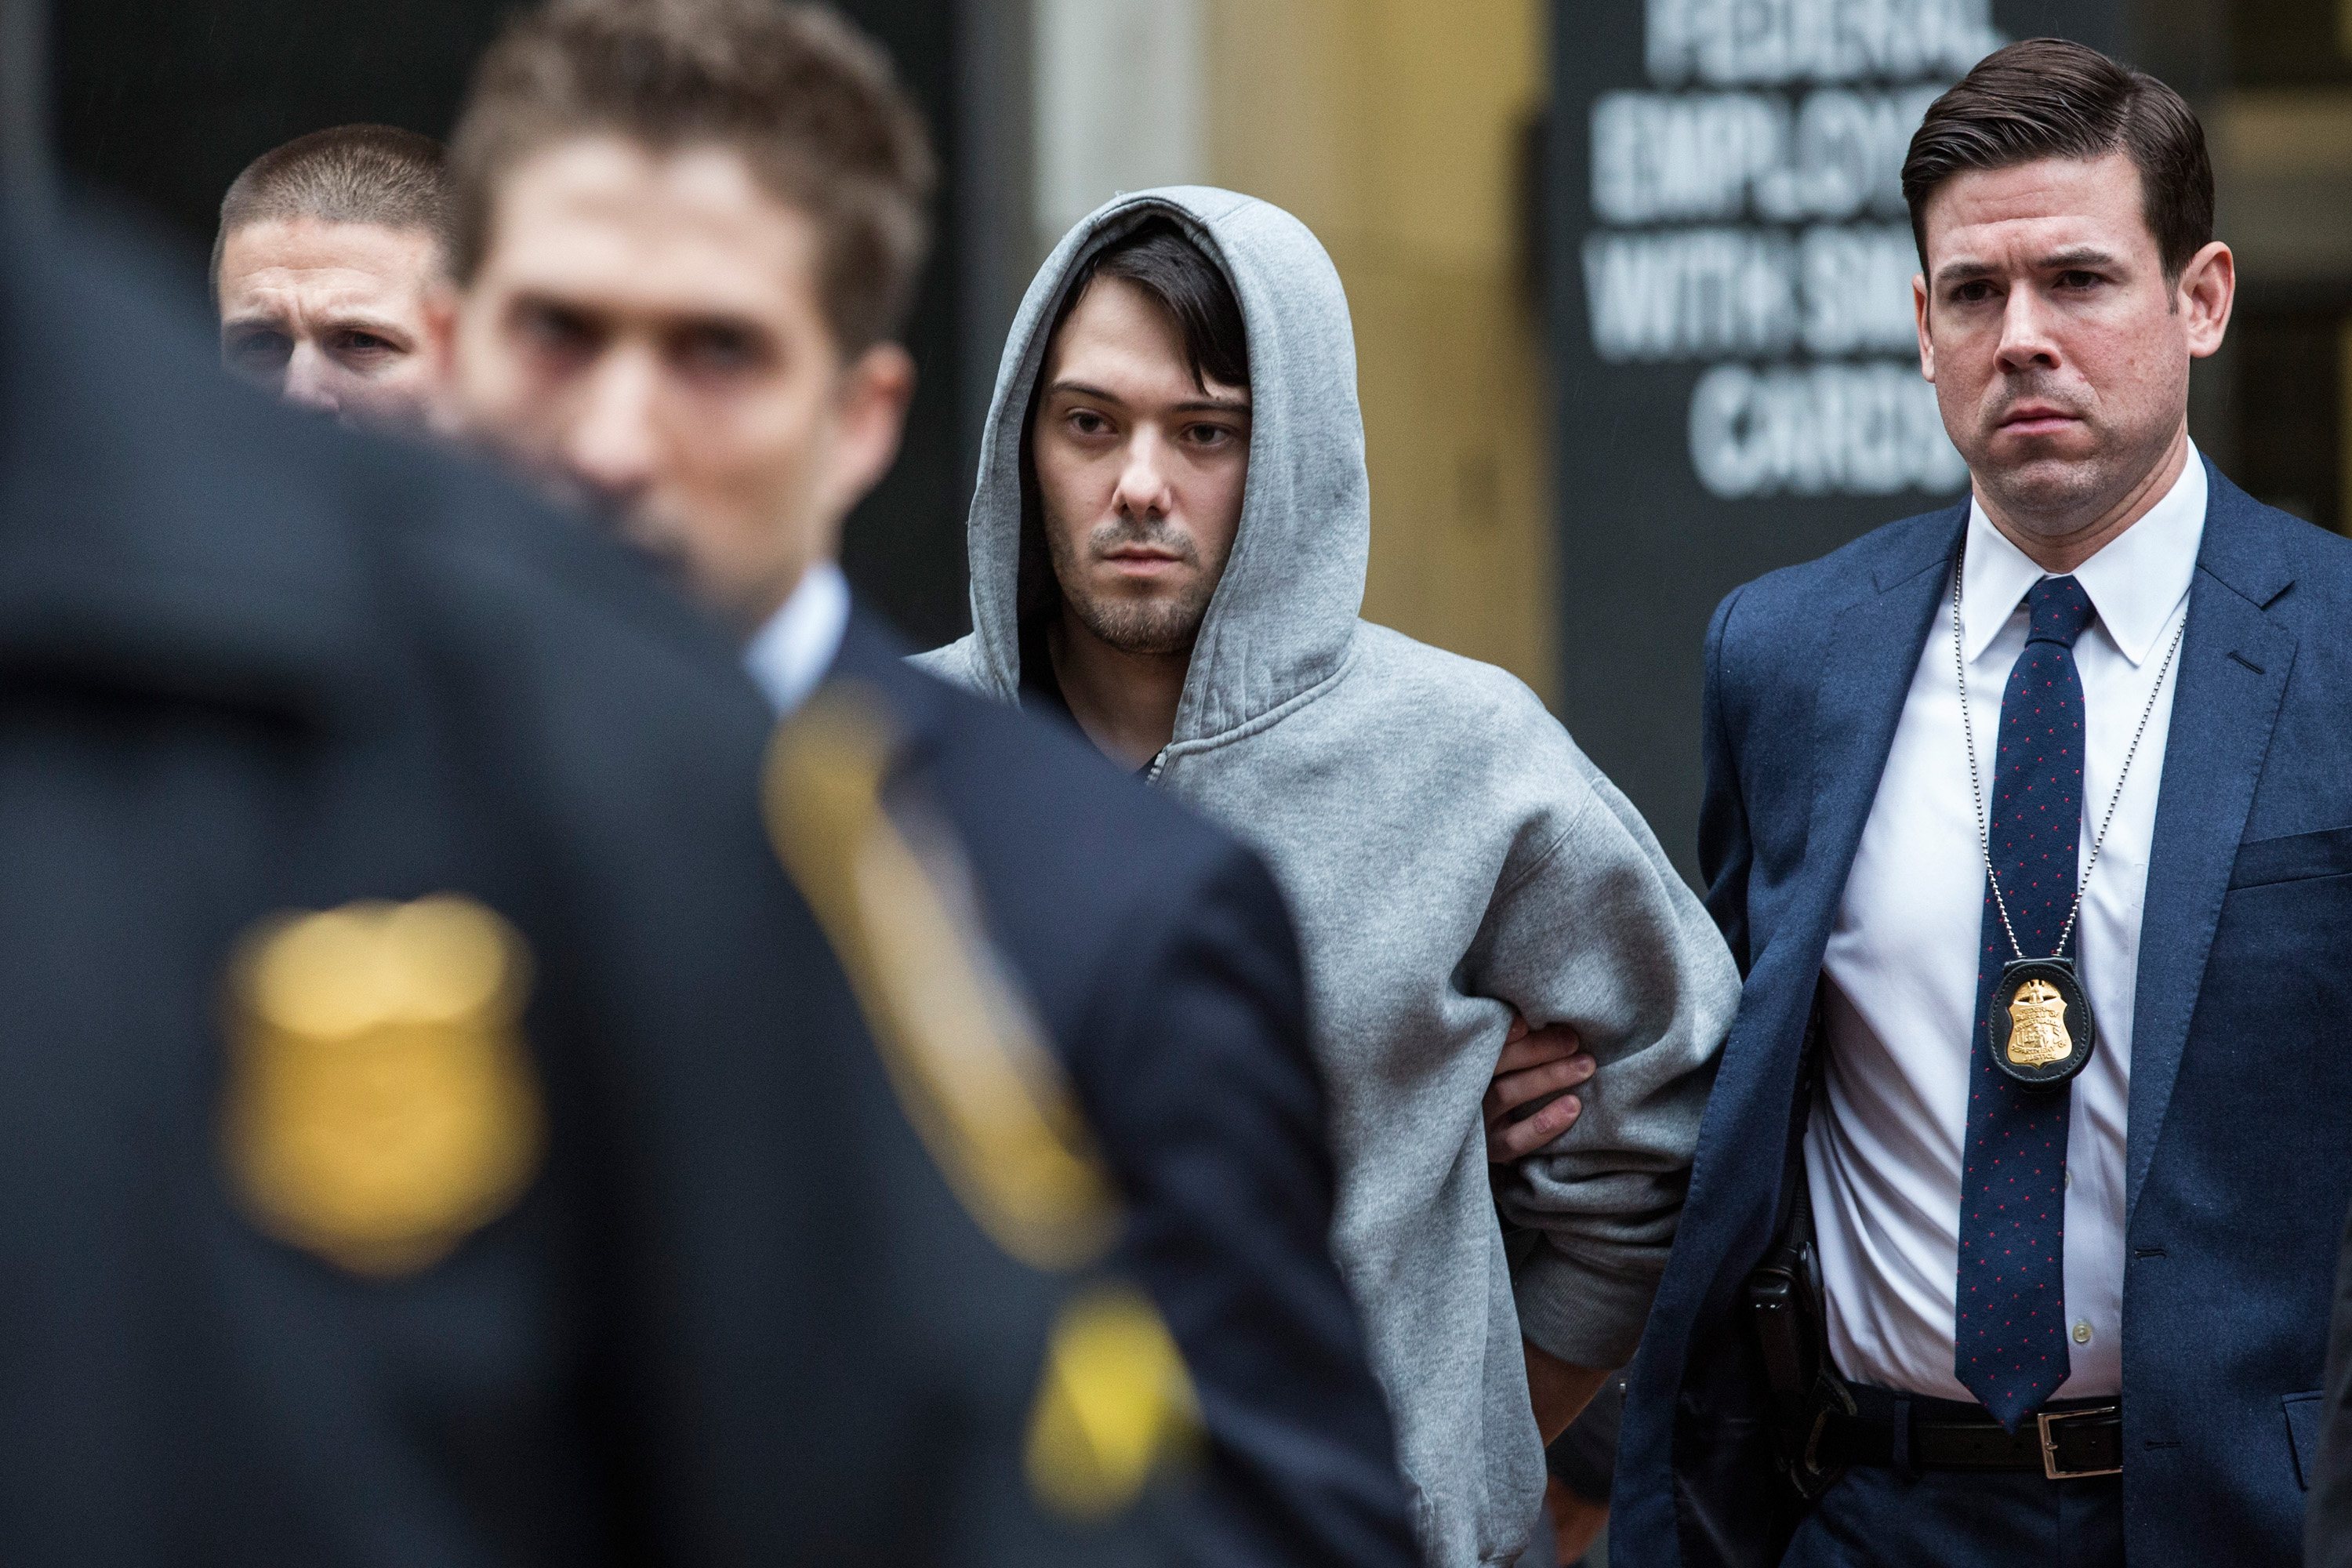 Martin Shkreli is brought out of 26 Federal Plaza by law enforcement officials after being arrested for securities fraud on Dec. 17 in New York City. (Andrew Burton—Getty Images)